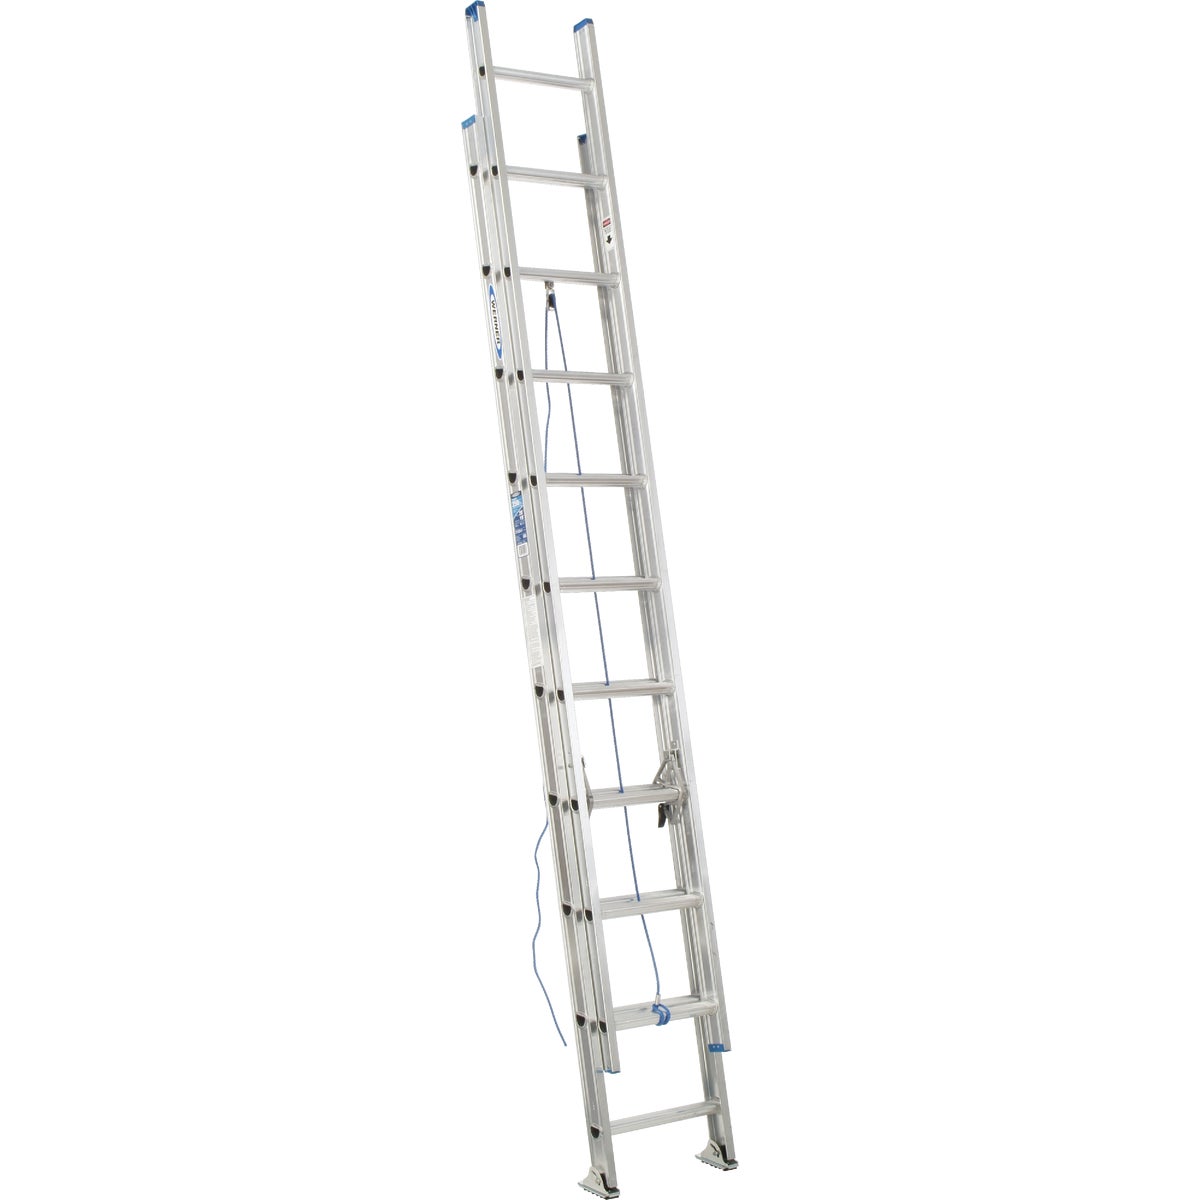 Werner 20 Ft. Aluminum Extension Ladder with 250 Lb. Load Capacity Type I Duty Rating